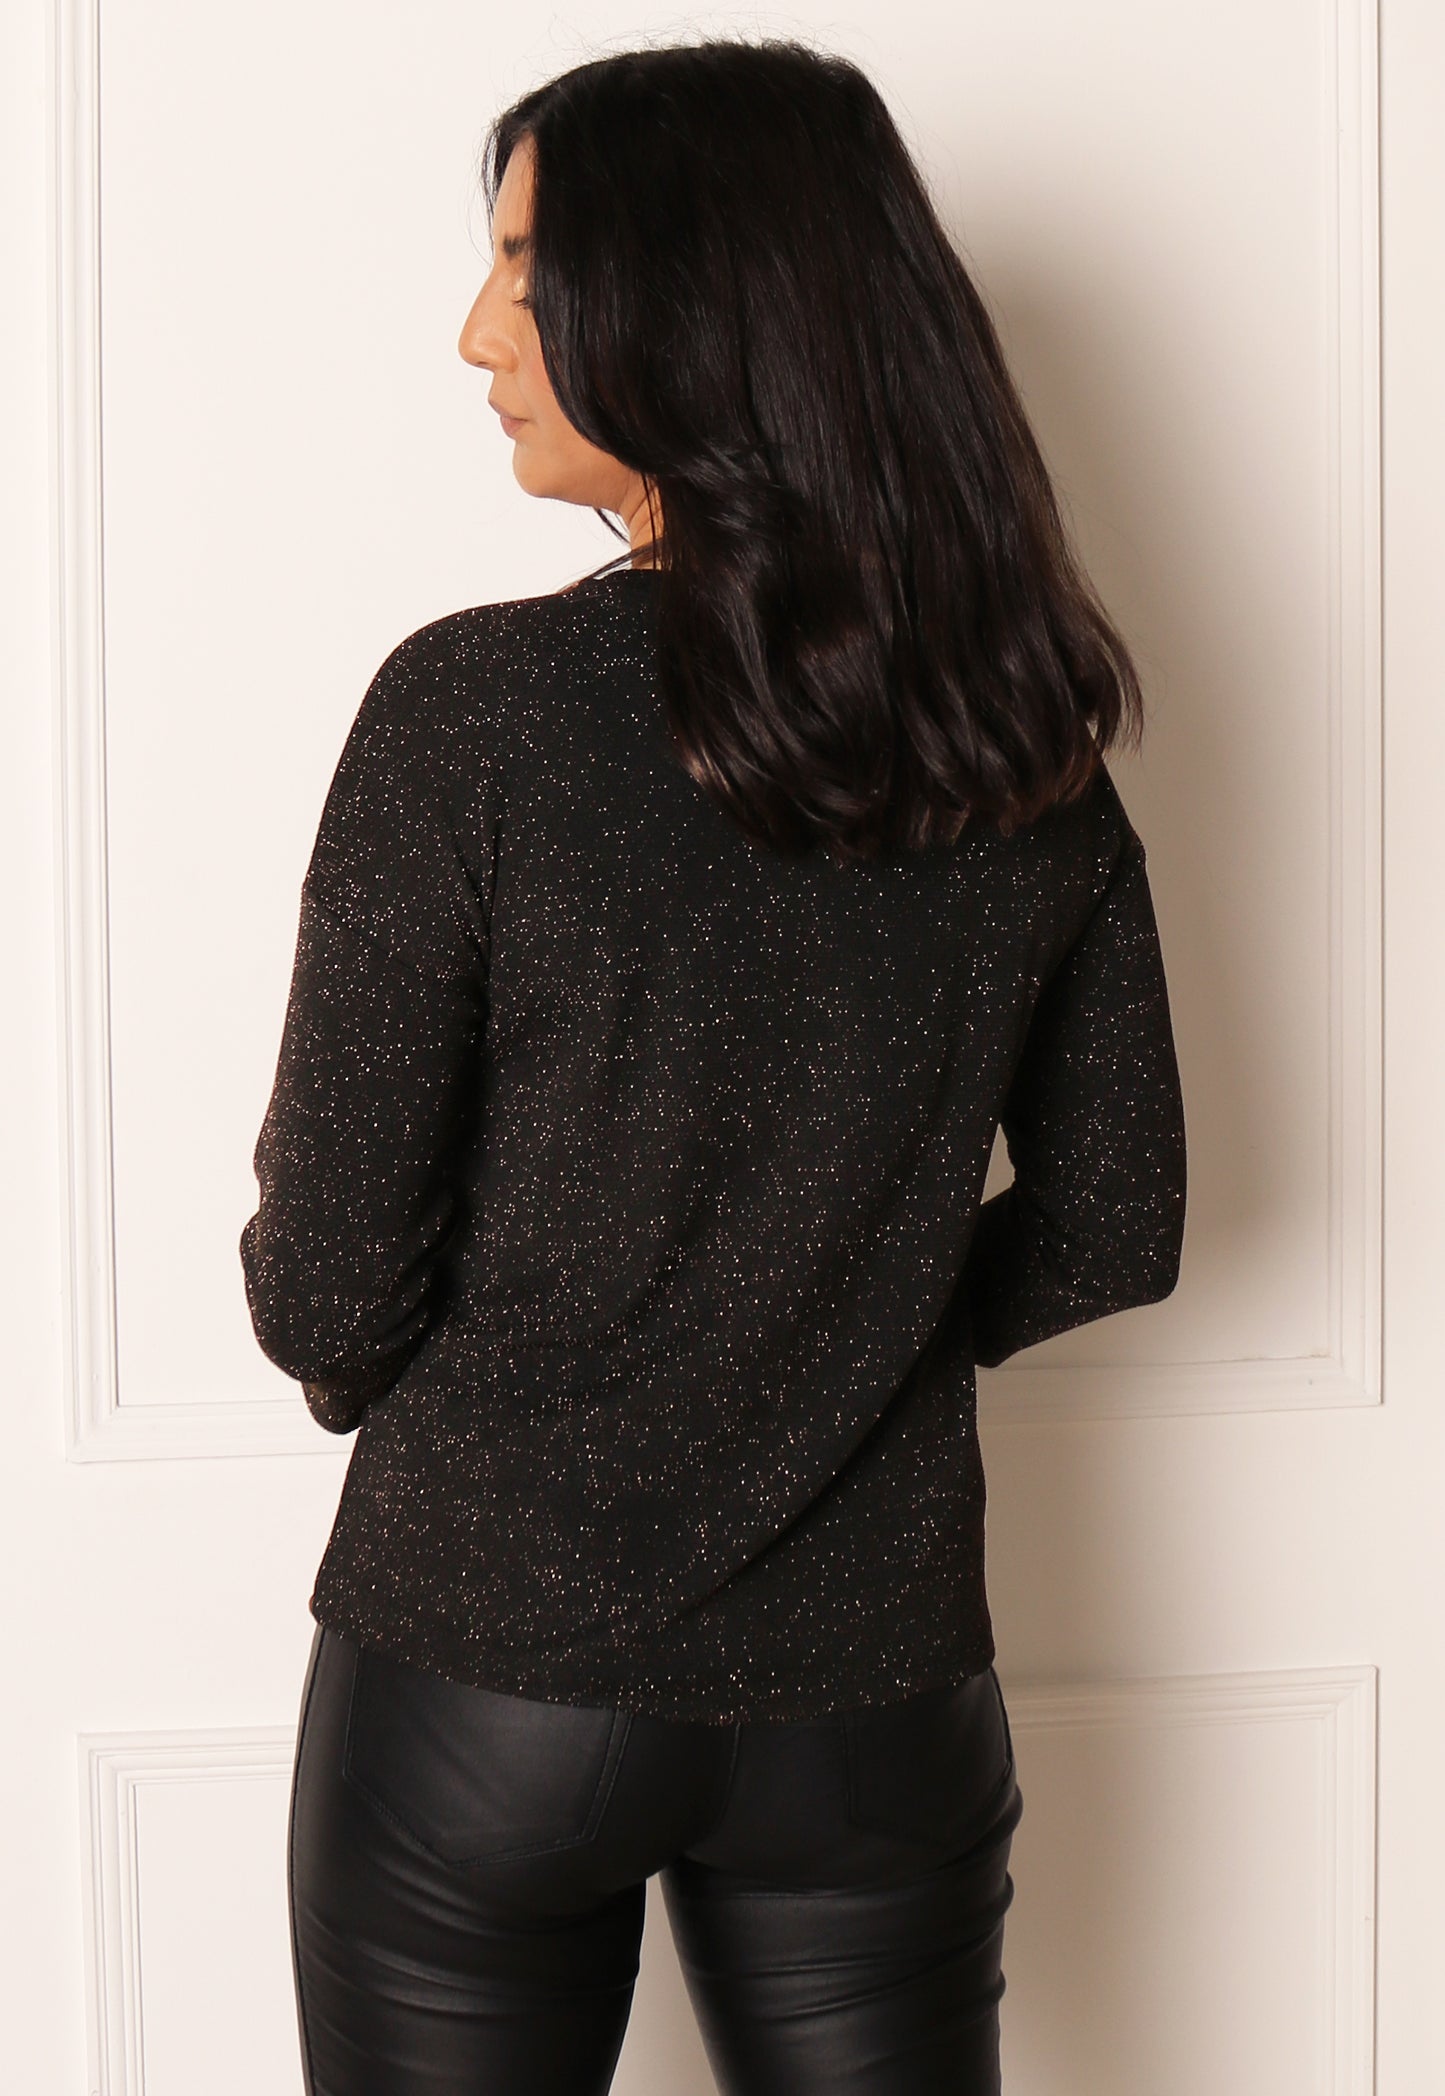 ONLY Queen Glitter Lurex Top with Three Quarter Sleeves in Black & Bronze - concretebartops